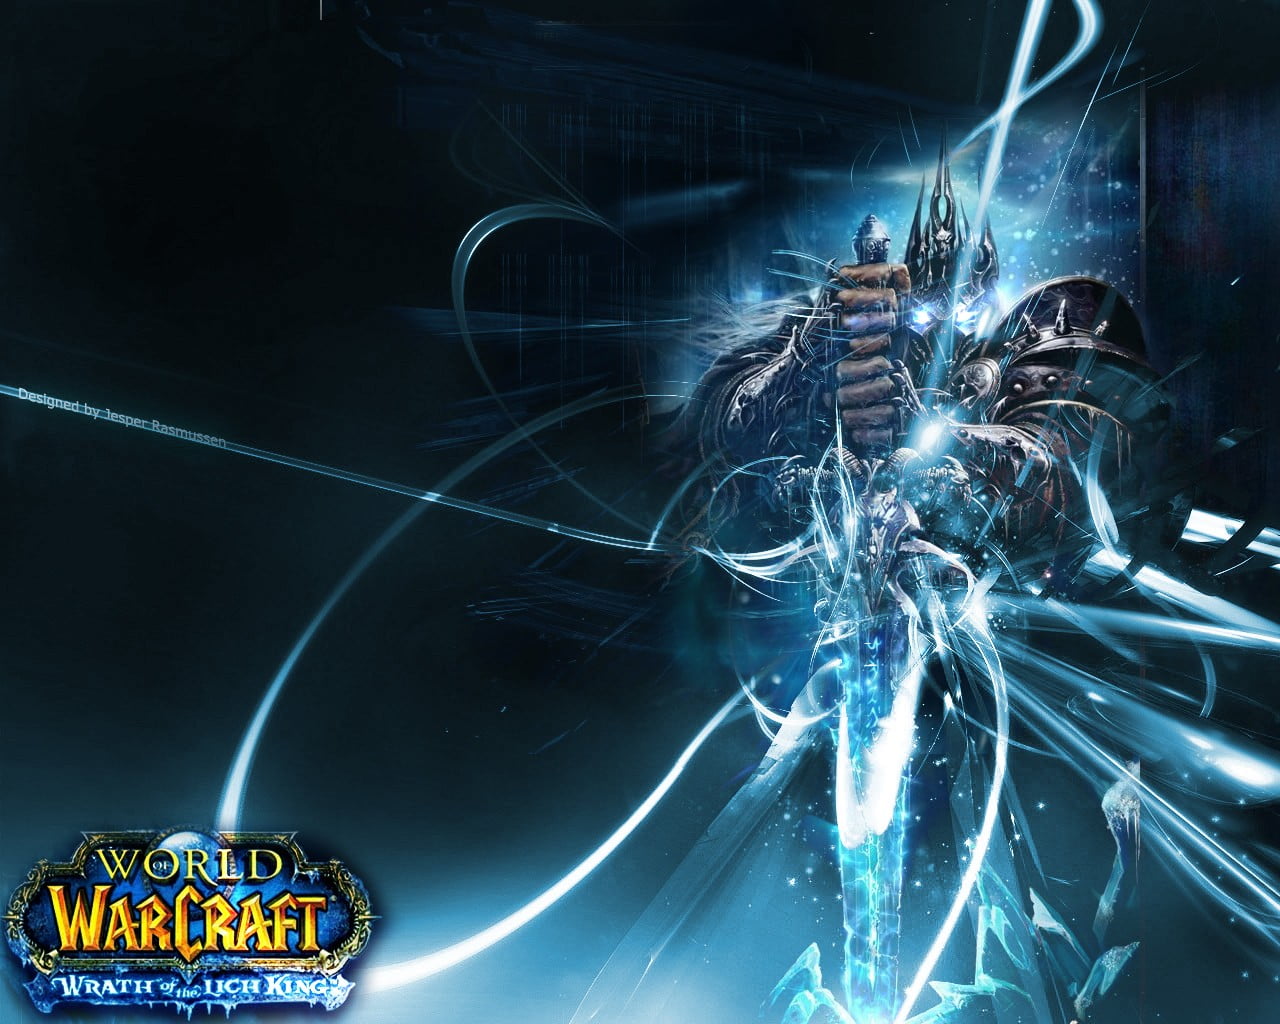 World of Warcraft game cover,  World of Warcraft, World of Warcraft: Wrath of the Lich King